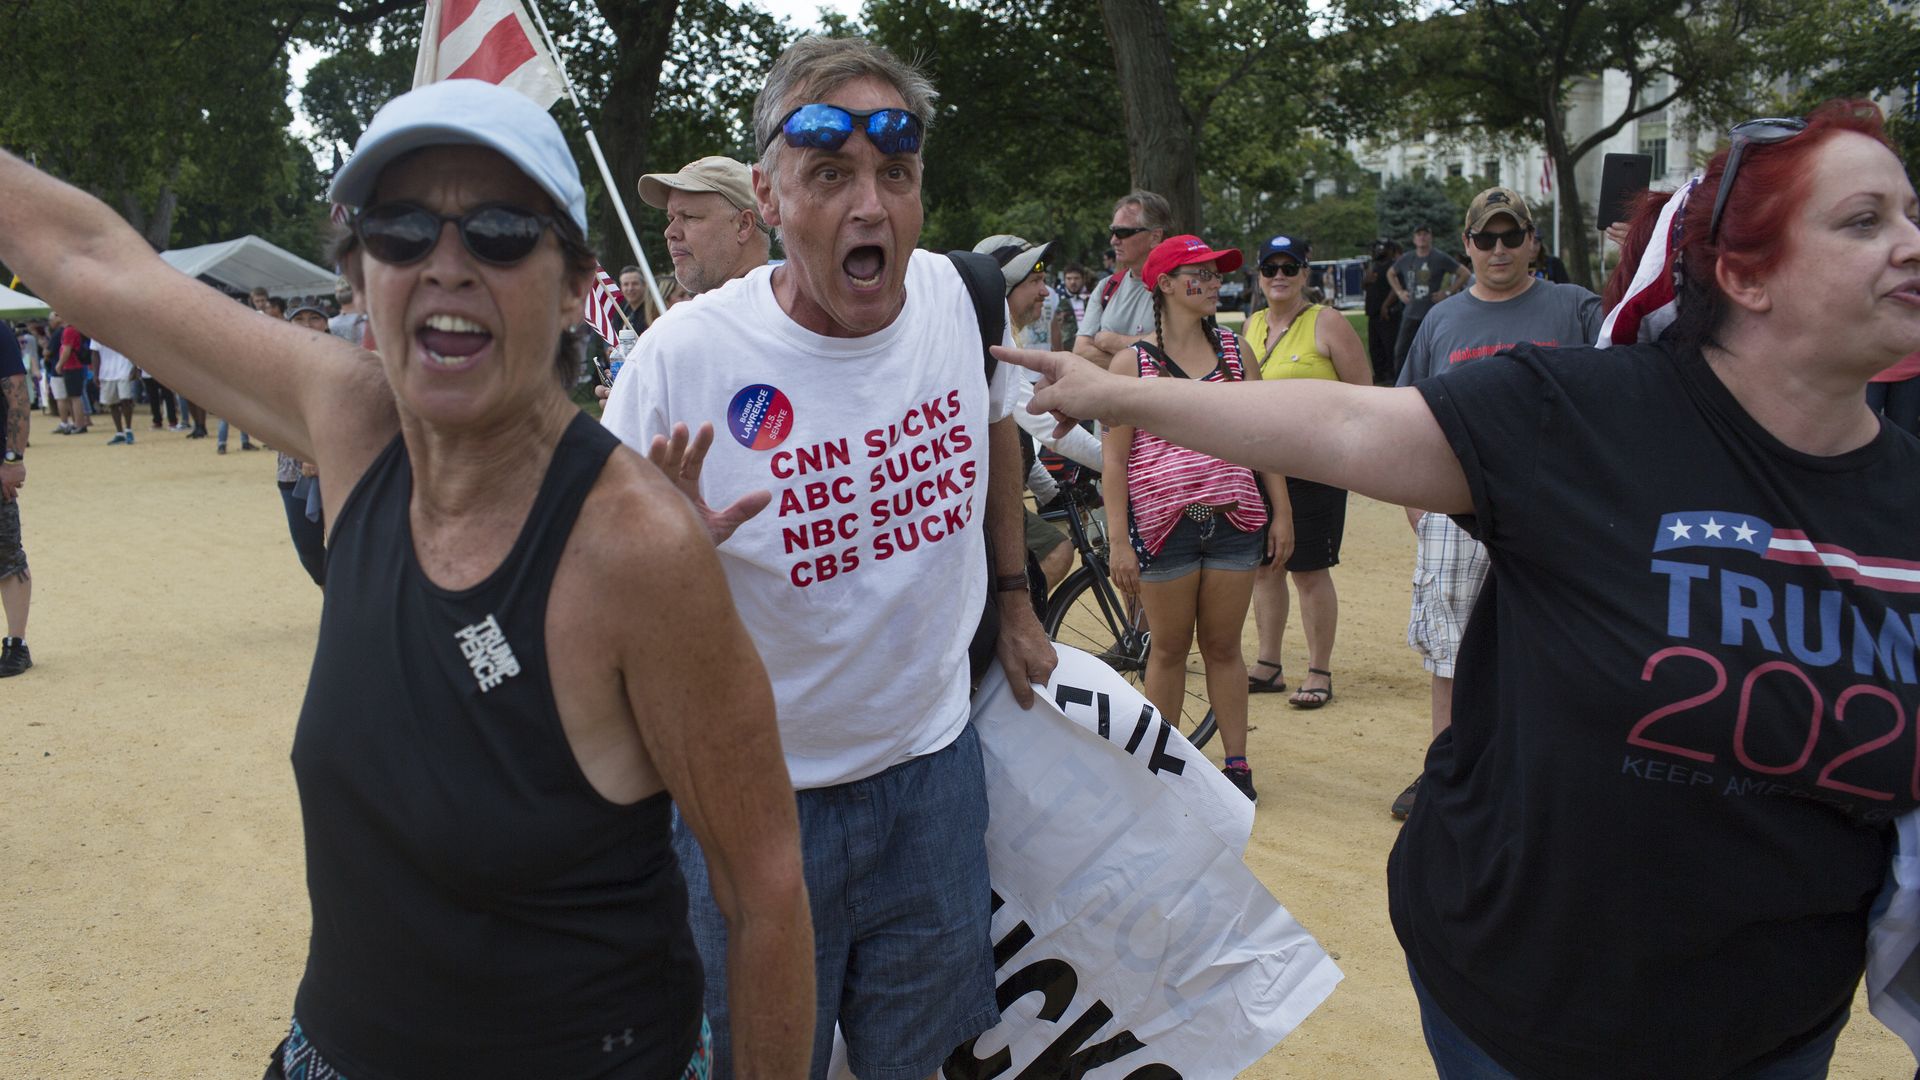 Supporters of U.S. President Donald Trump scream at the media as they gather for what was billed as 'The Mother of all Rallies' on September 16, 2017